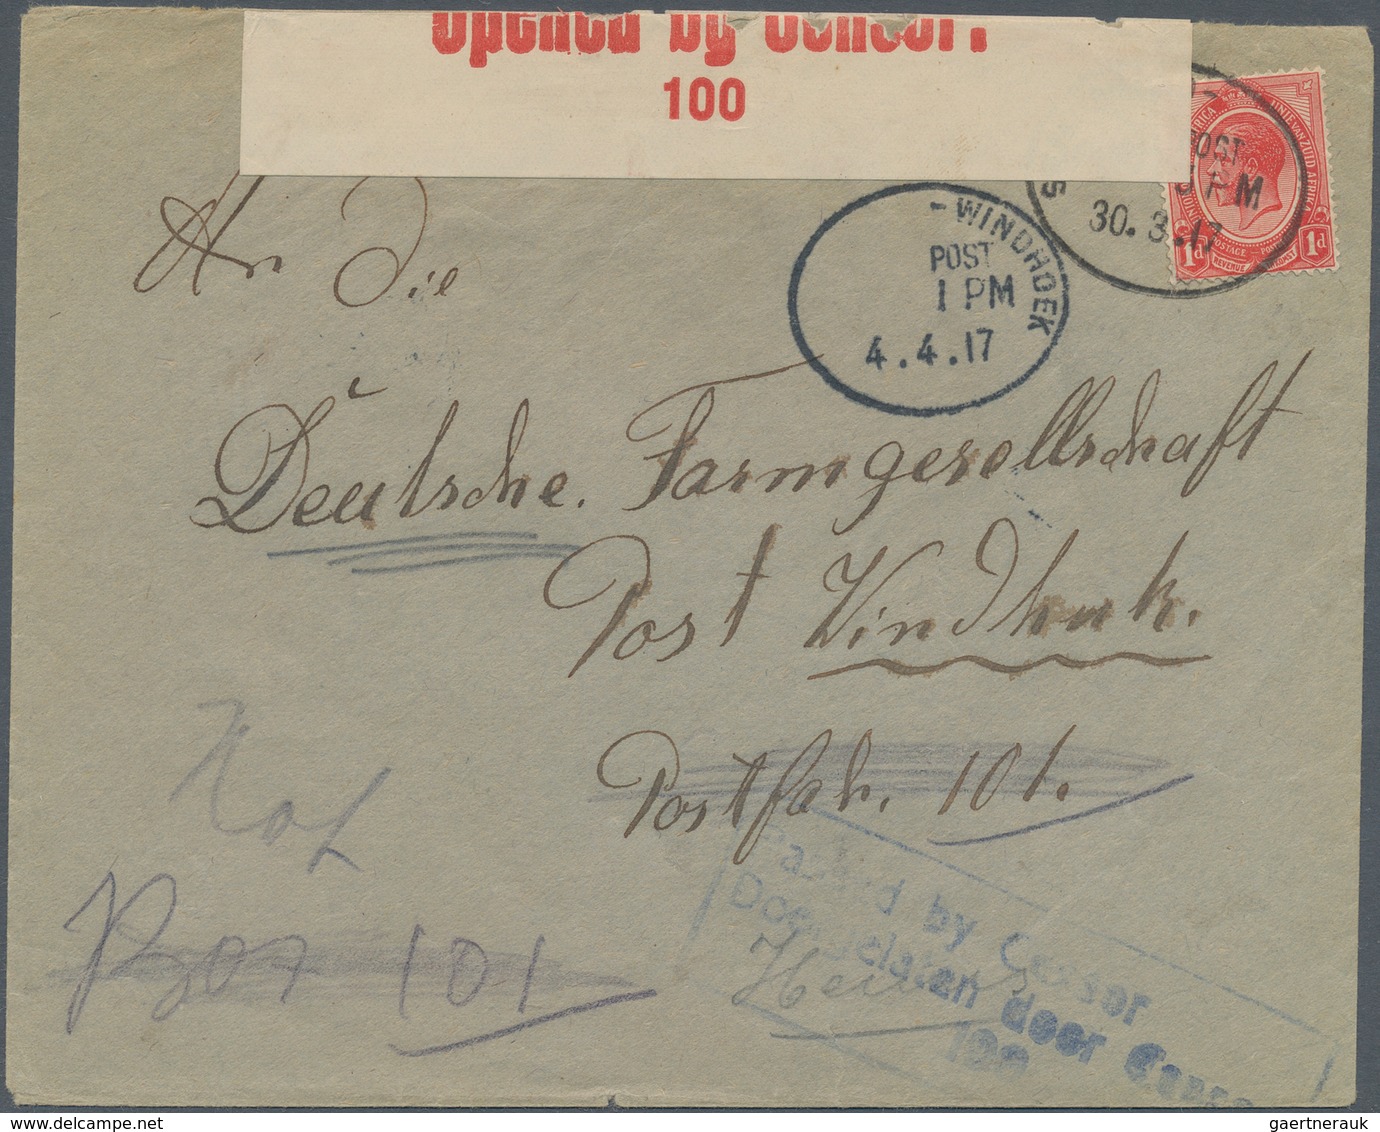 Südwestafrika: 1915/1919, 48 covers and fronts of covers, all with KGV frankings and mostly opened a